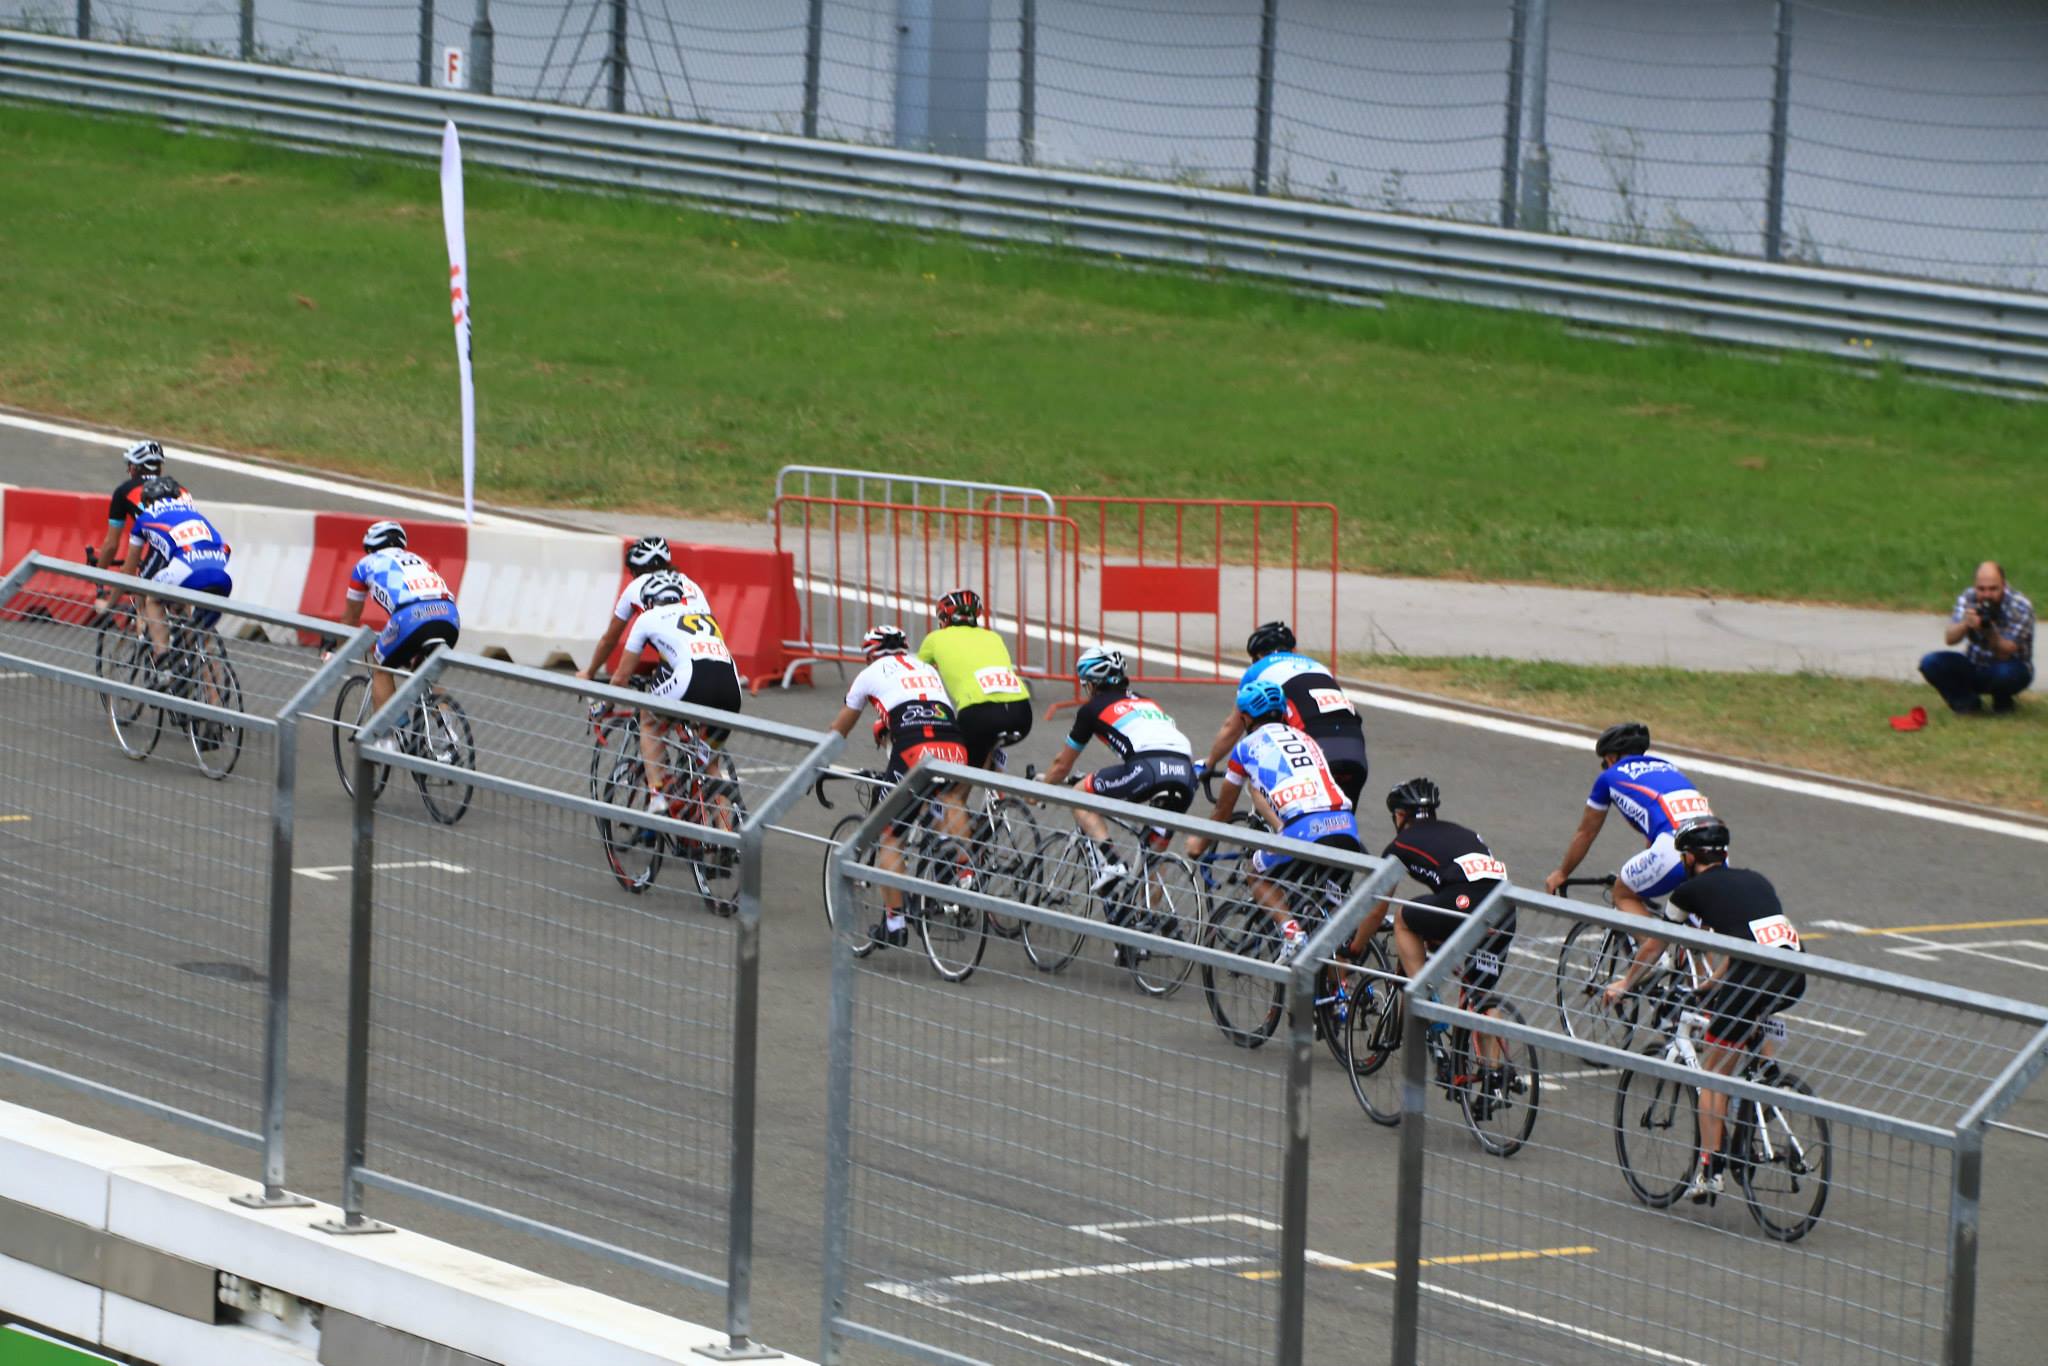 Intercity road race, head of the bunch (May 25, 2014)